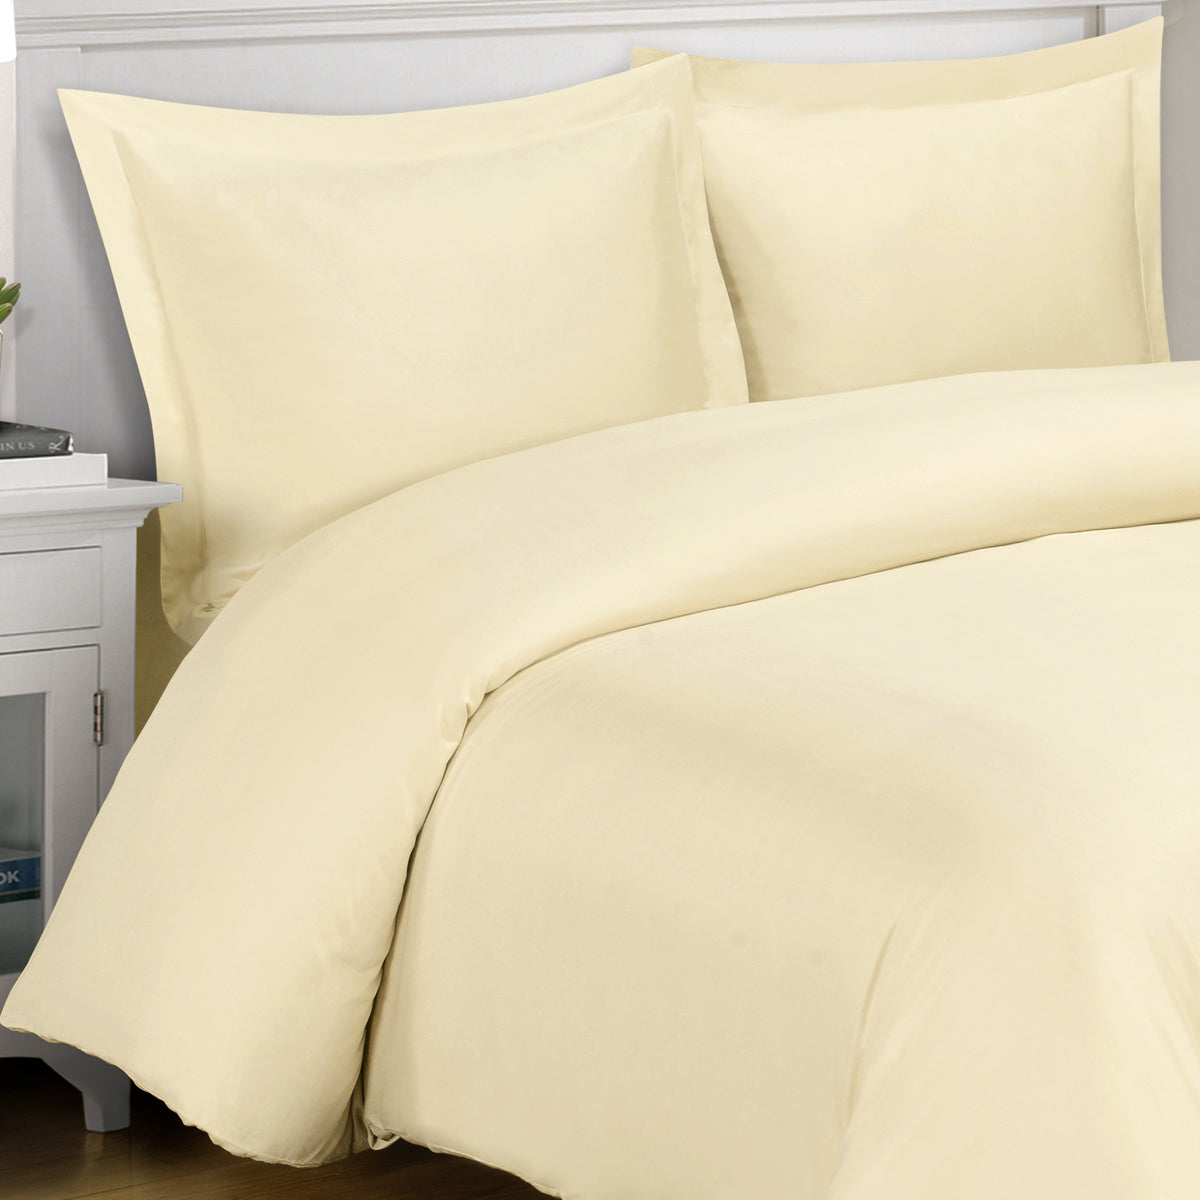 Buy 36" Inches Pocket Egyptian Cotton Ivory Fitted Sheet at-EgyptianHomeLinens.com